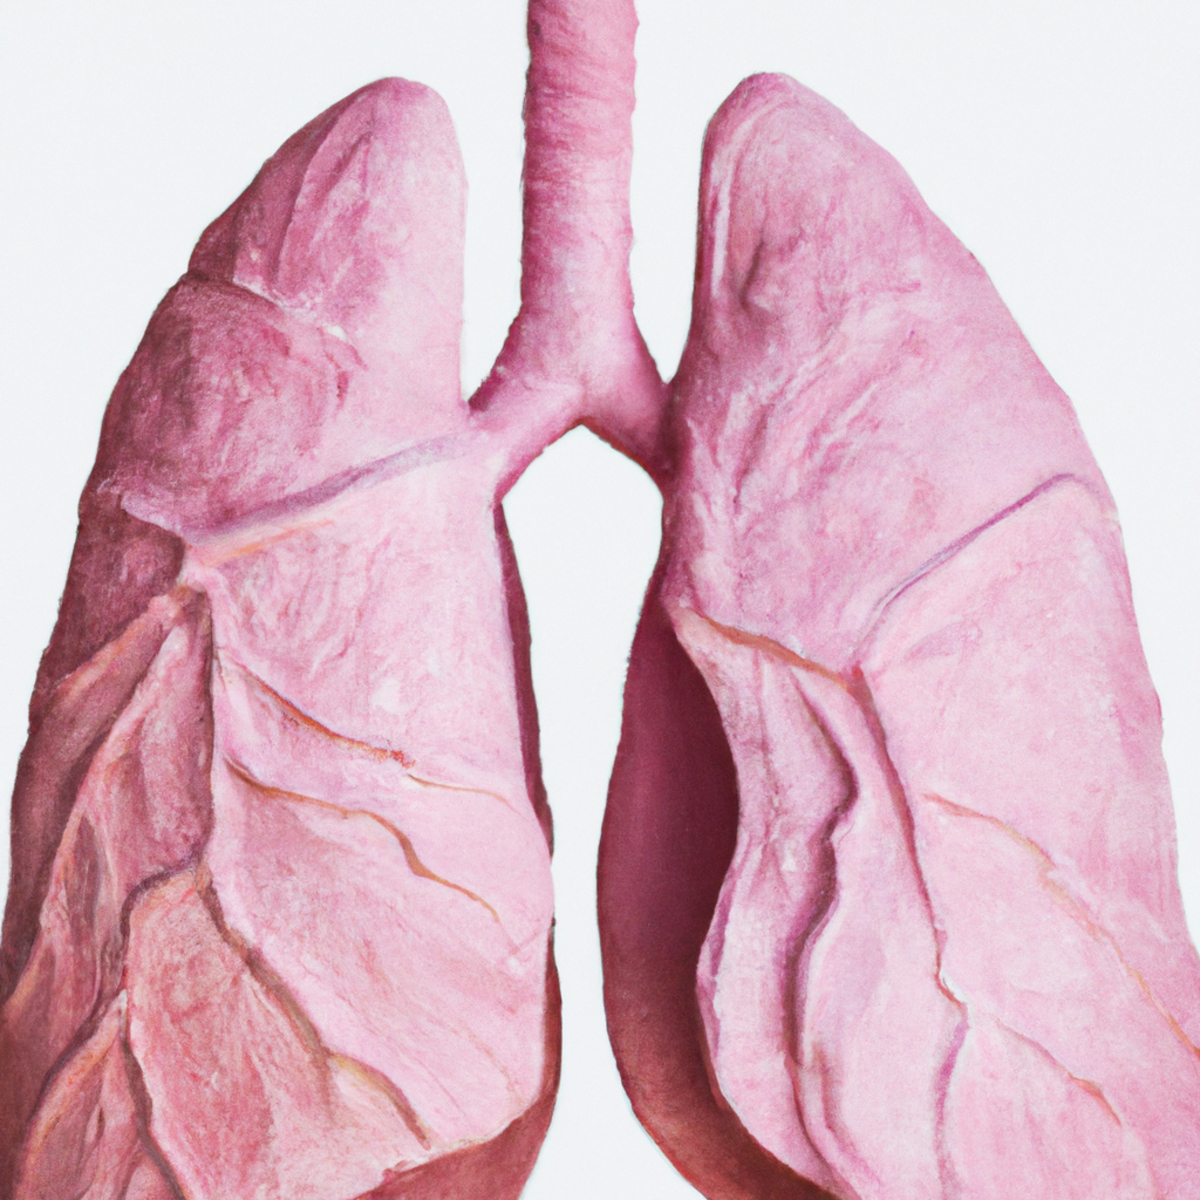 Detailed image of healthy lungs with sarcoidosis nodules and a stethoscope.